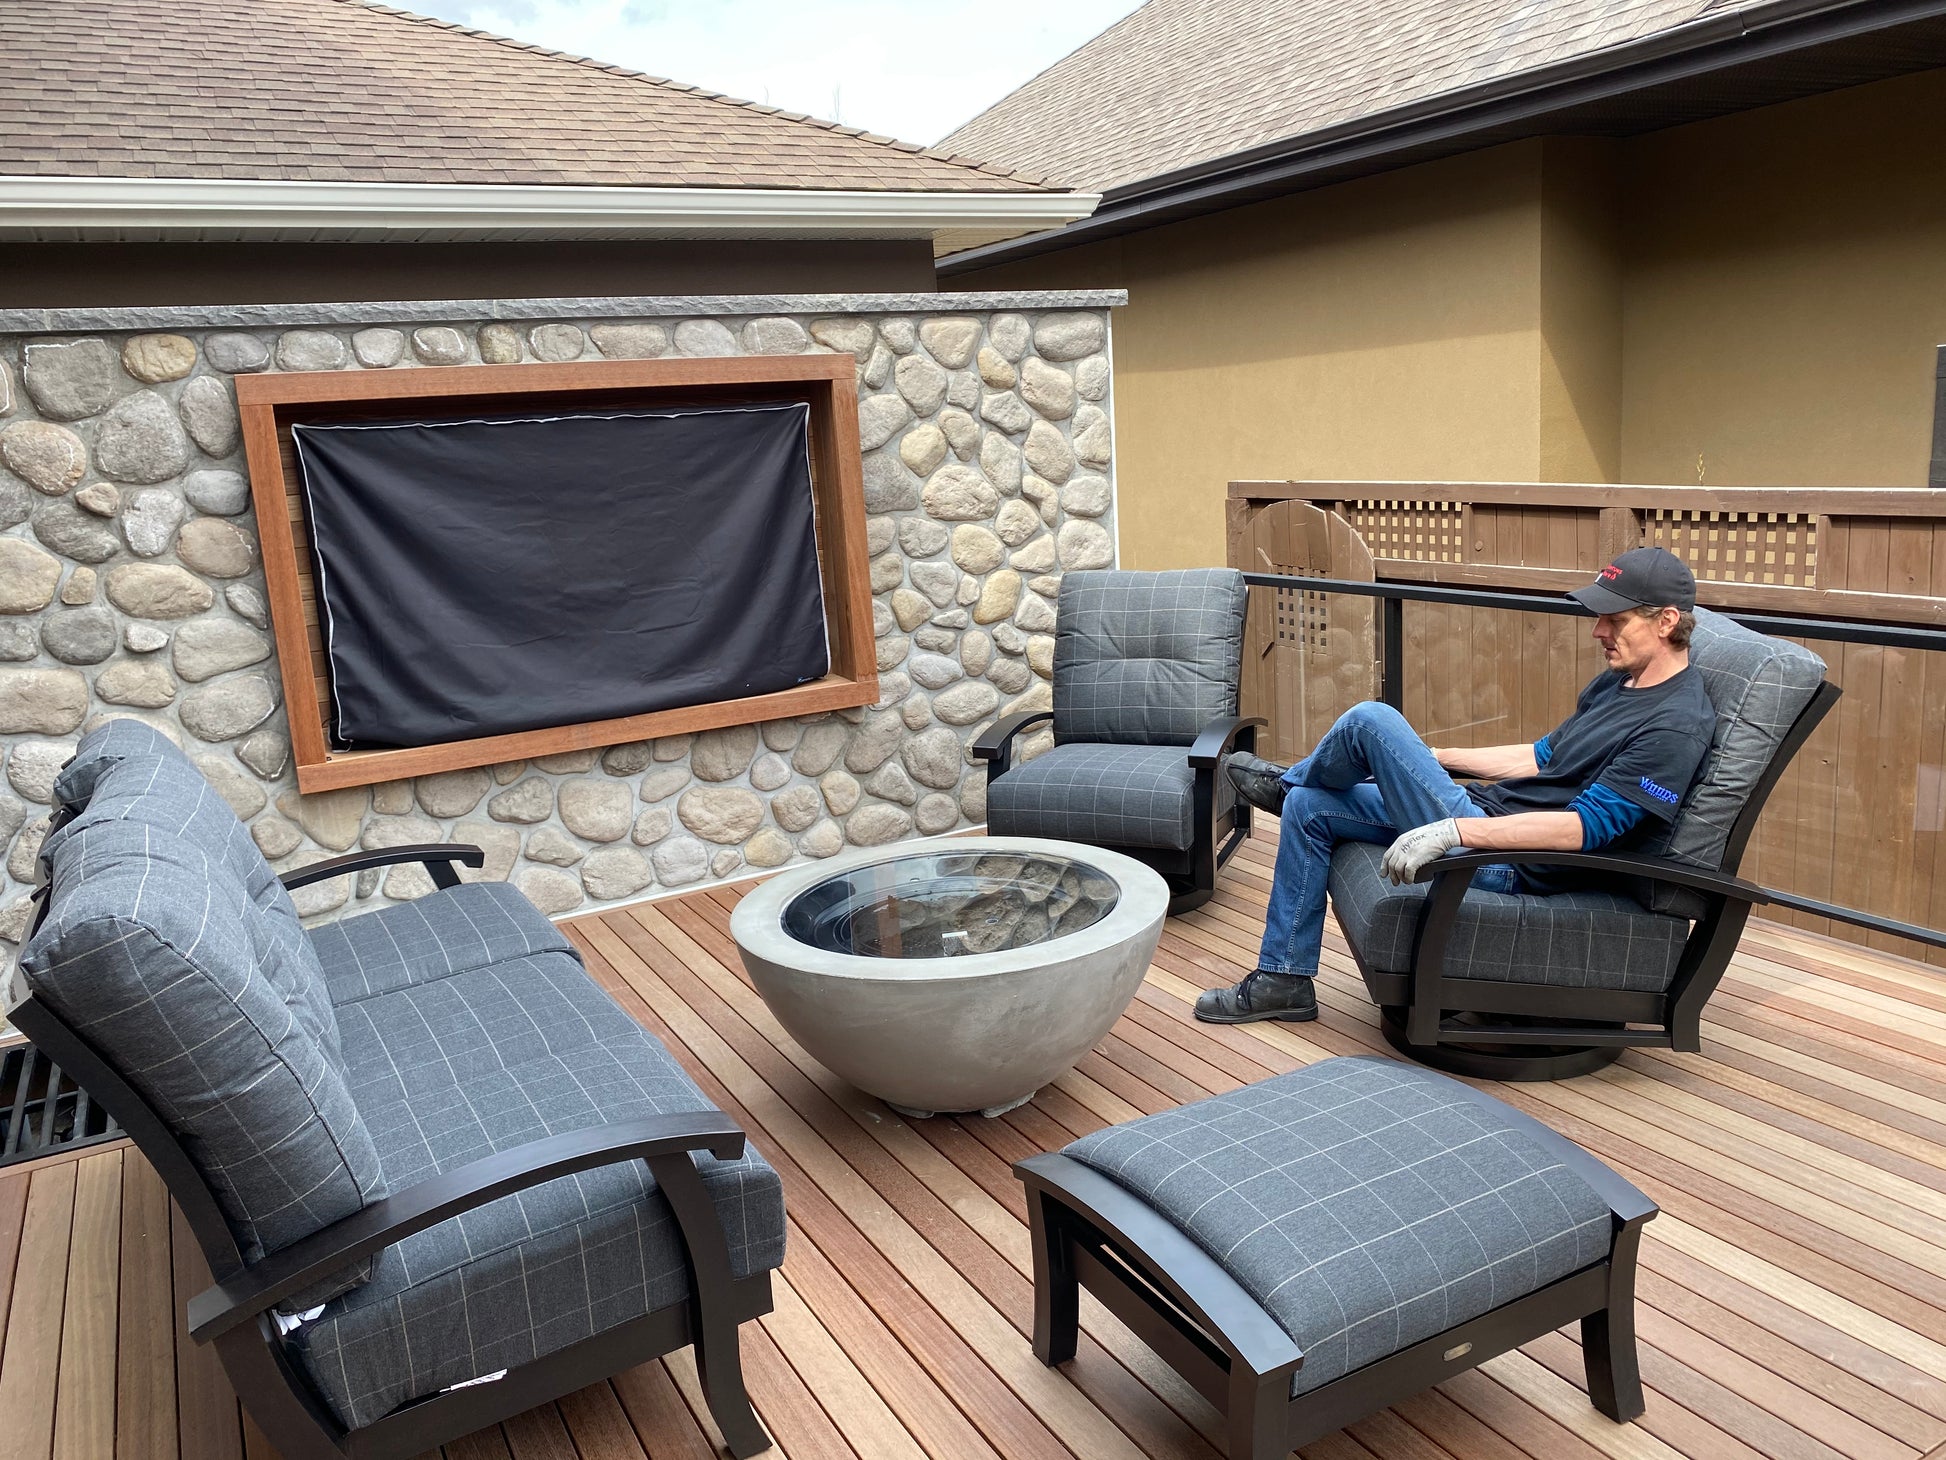 Outdoor Great Room 30" Cove Fire Bowl | An absolute stunner in any outdoor living space.  Get yours this summer for patio season.  Available at Barbecues Galore: Burlington, Oakville, Etobicoke & Calgary